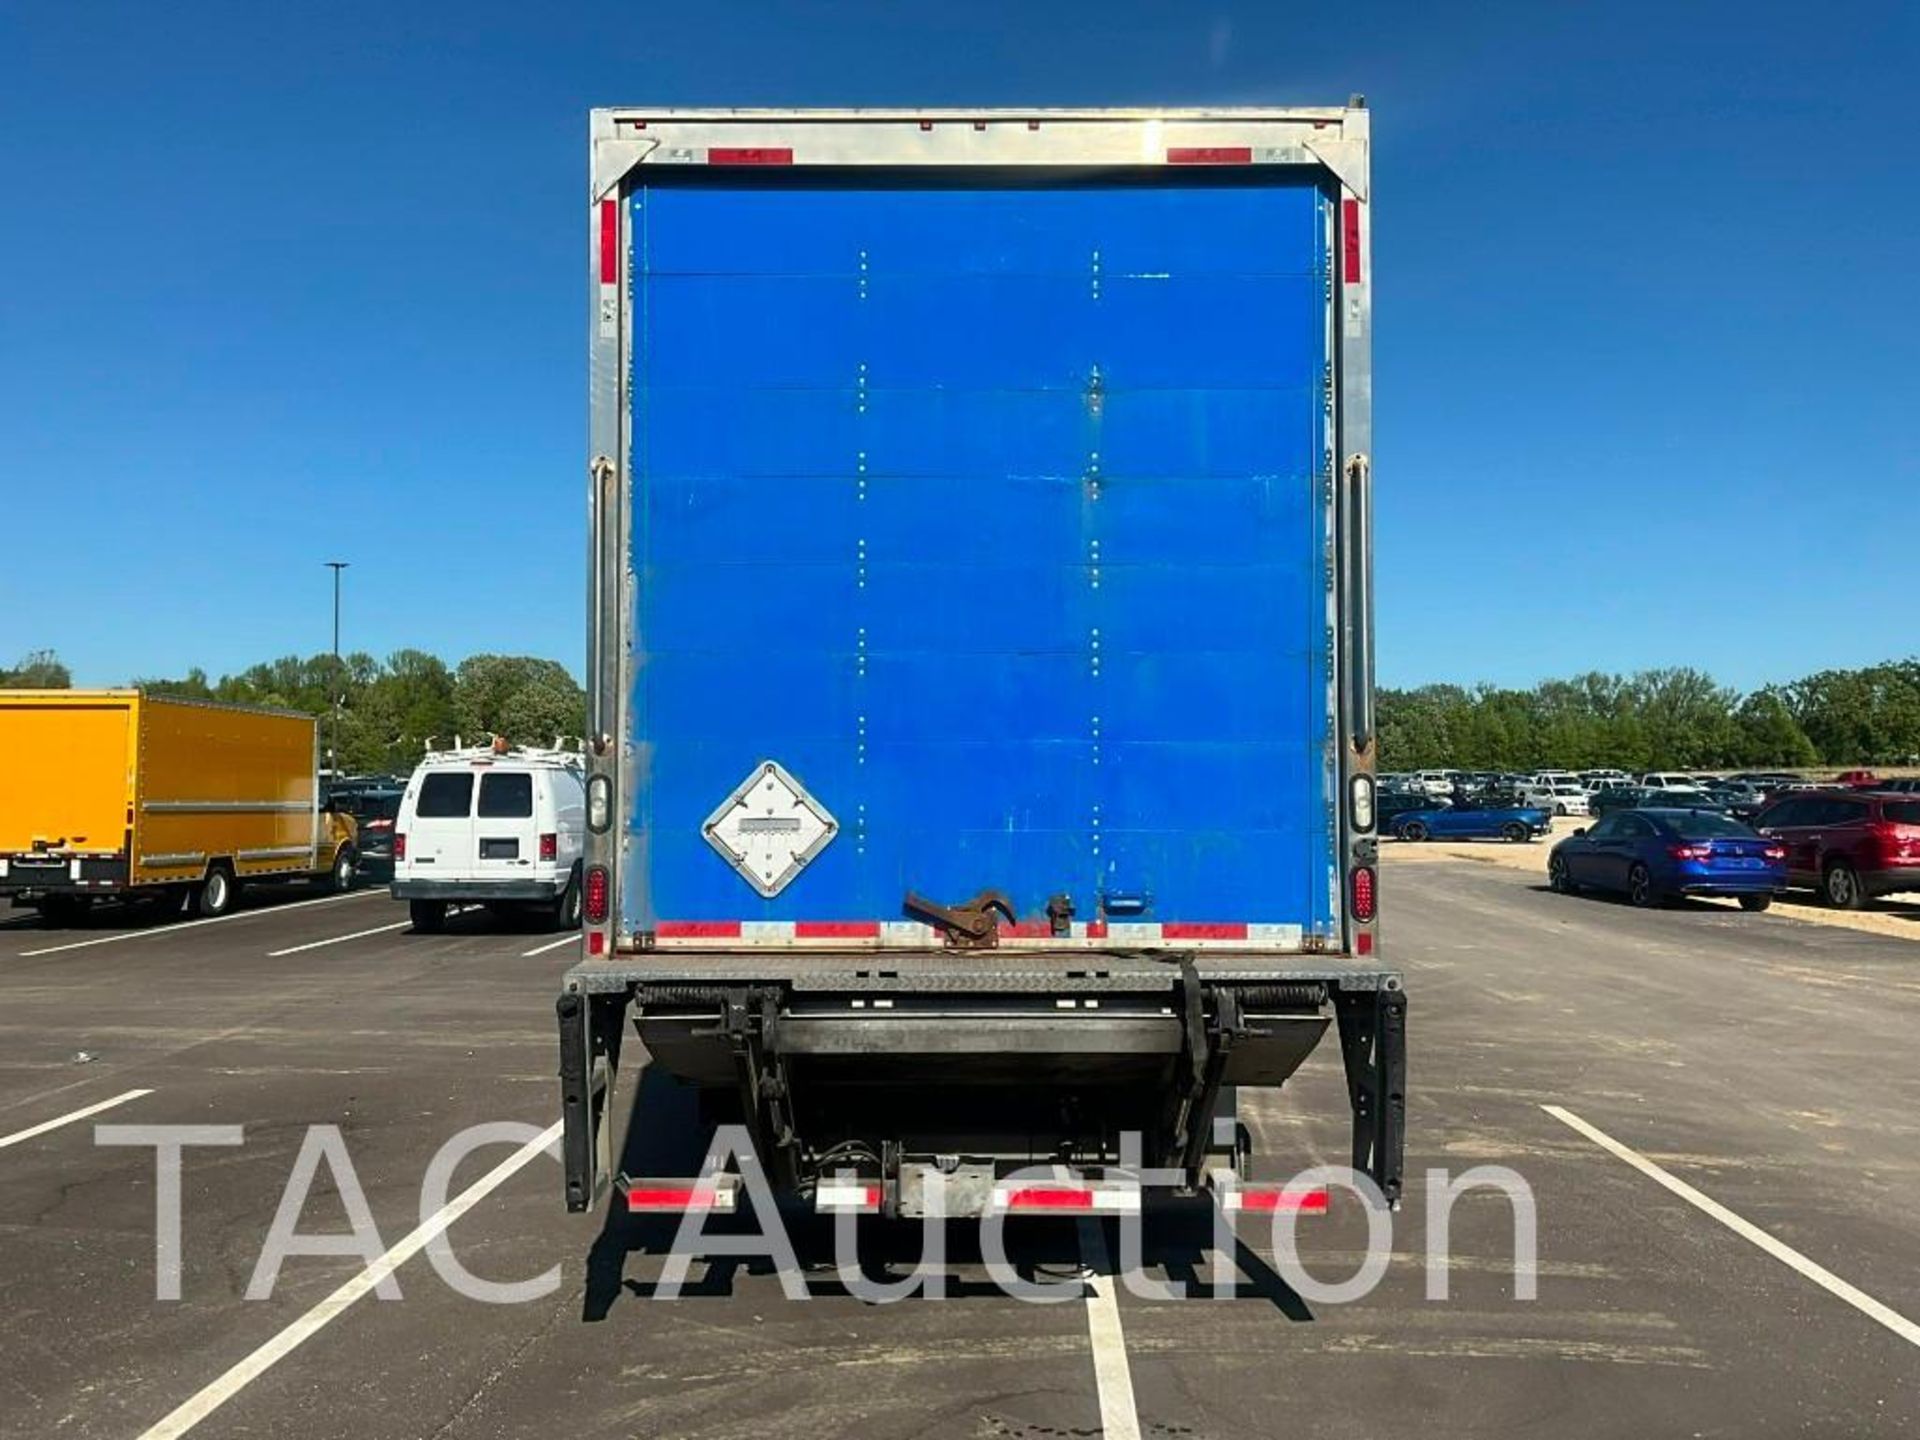 2018 Freightliner M2 Business Class 26ft Box Truck - Image 6 of 54